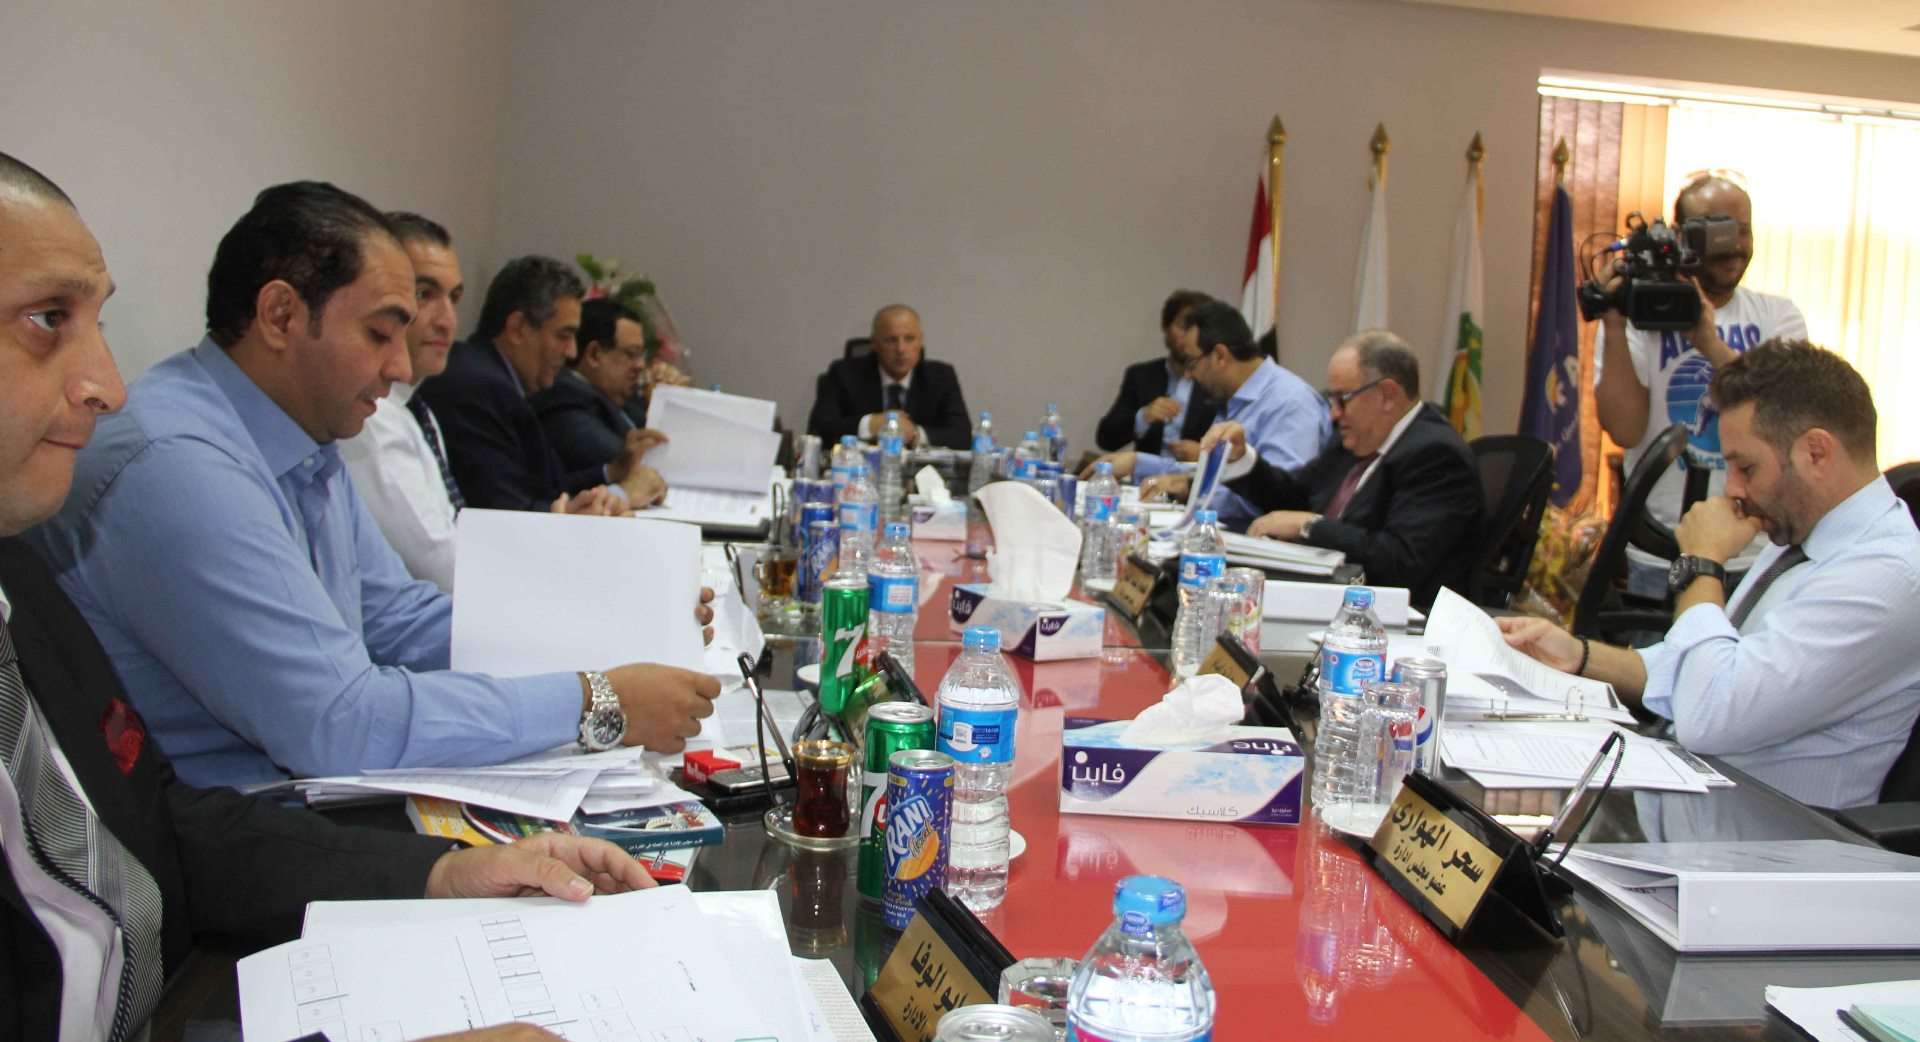 Council Egyptian Football Association Board meeting chaired by Hany Abo Rida